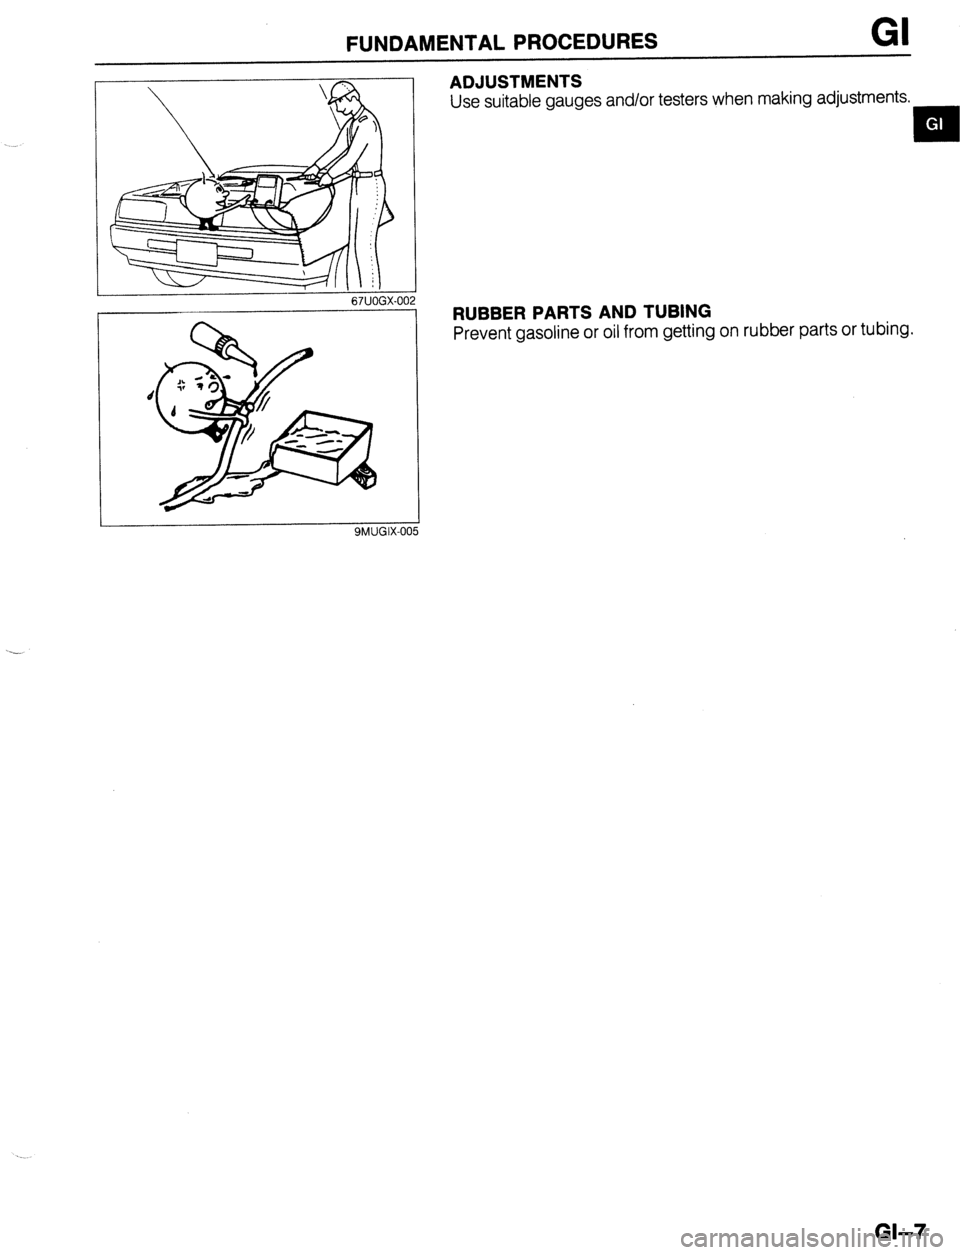 MAZDA PROTEGE 1992  Workshop Manual FUNDAMENTALPROCEDURES GI 
I 
67UOGX-00 
ADJUSTMENTS 
Use suitable gauges and/or testers when making adjustments. 
EN 
RUBBER PARTS AND TUBING 
Prevent gasoline or oil from getting on rubber parts or t